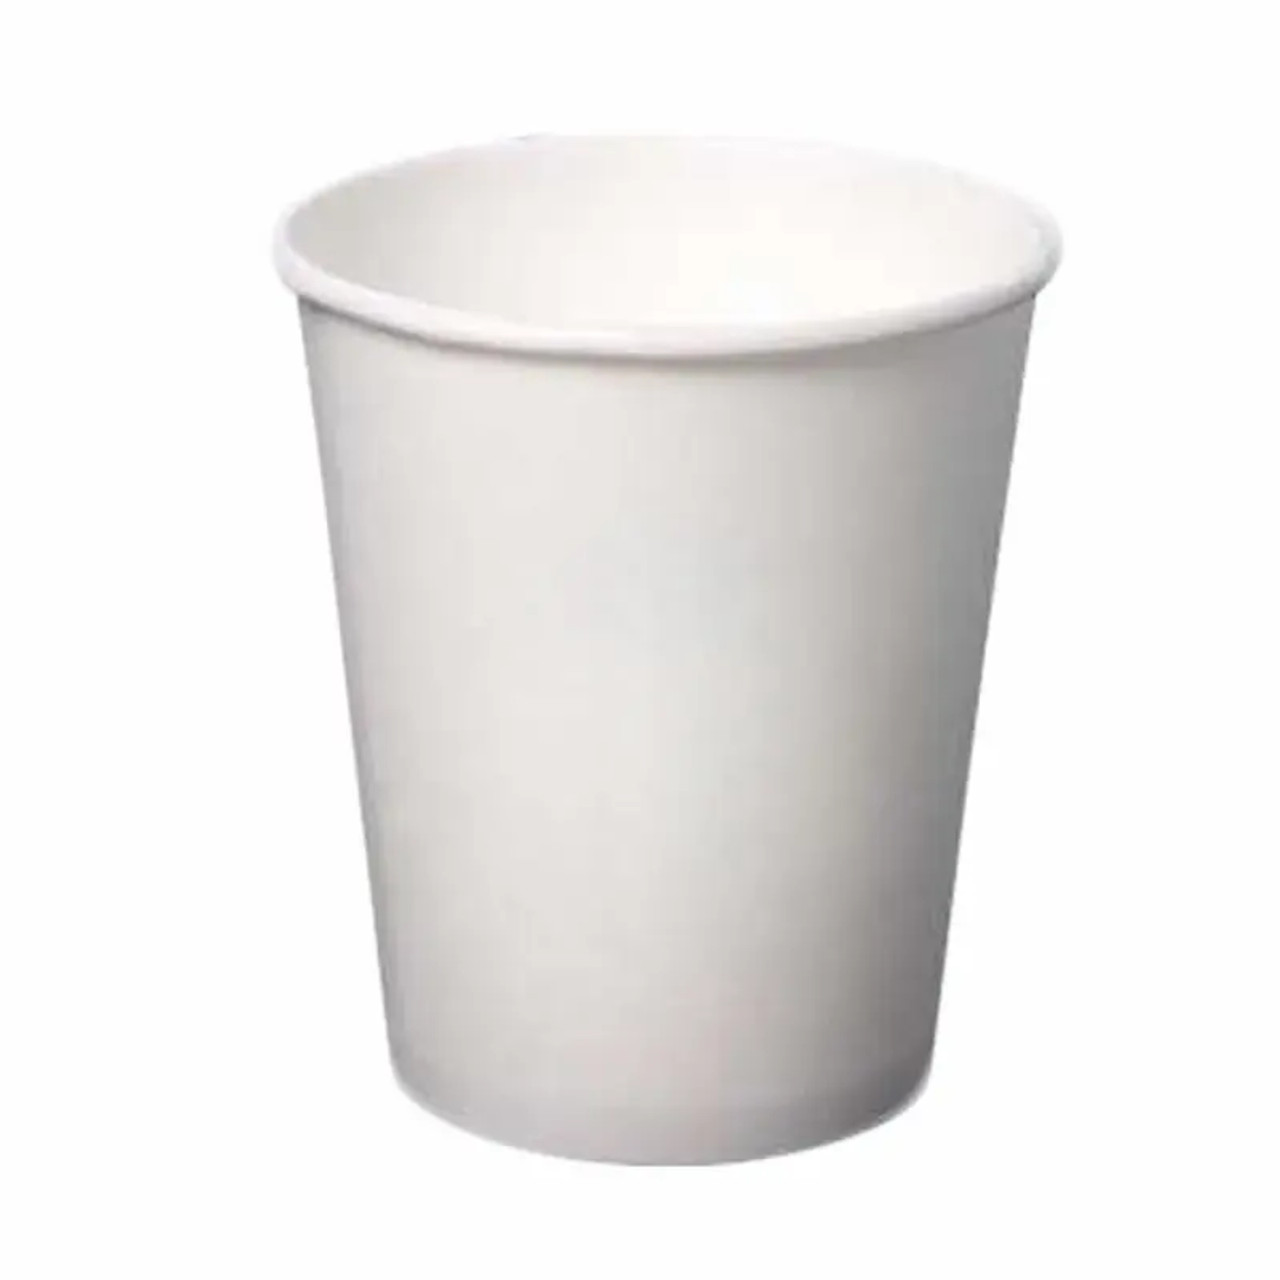 Dukal Unipack Paper Drinking Cups 5 oz. White 800/cs